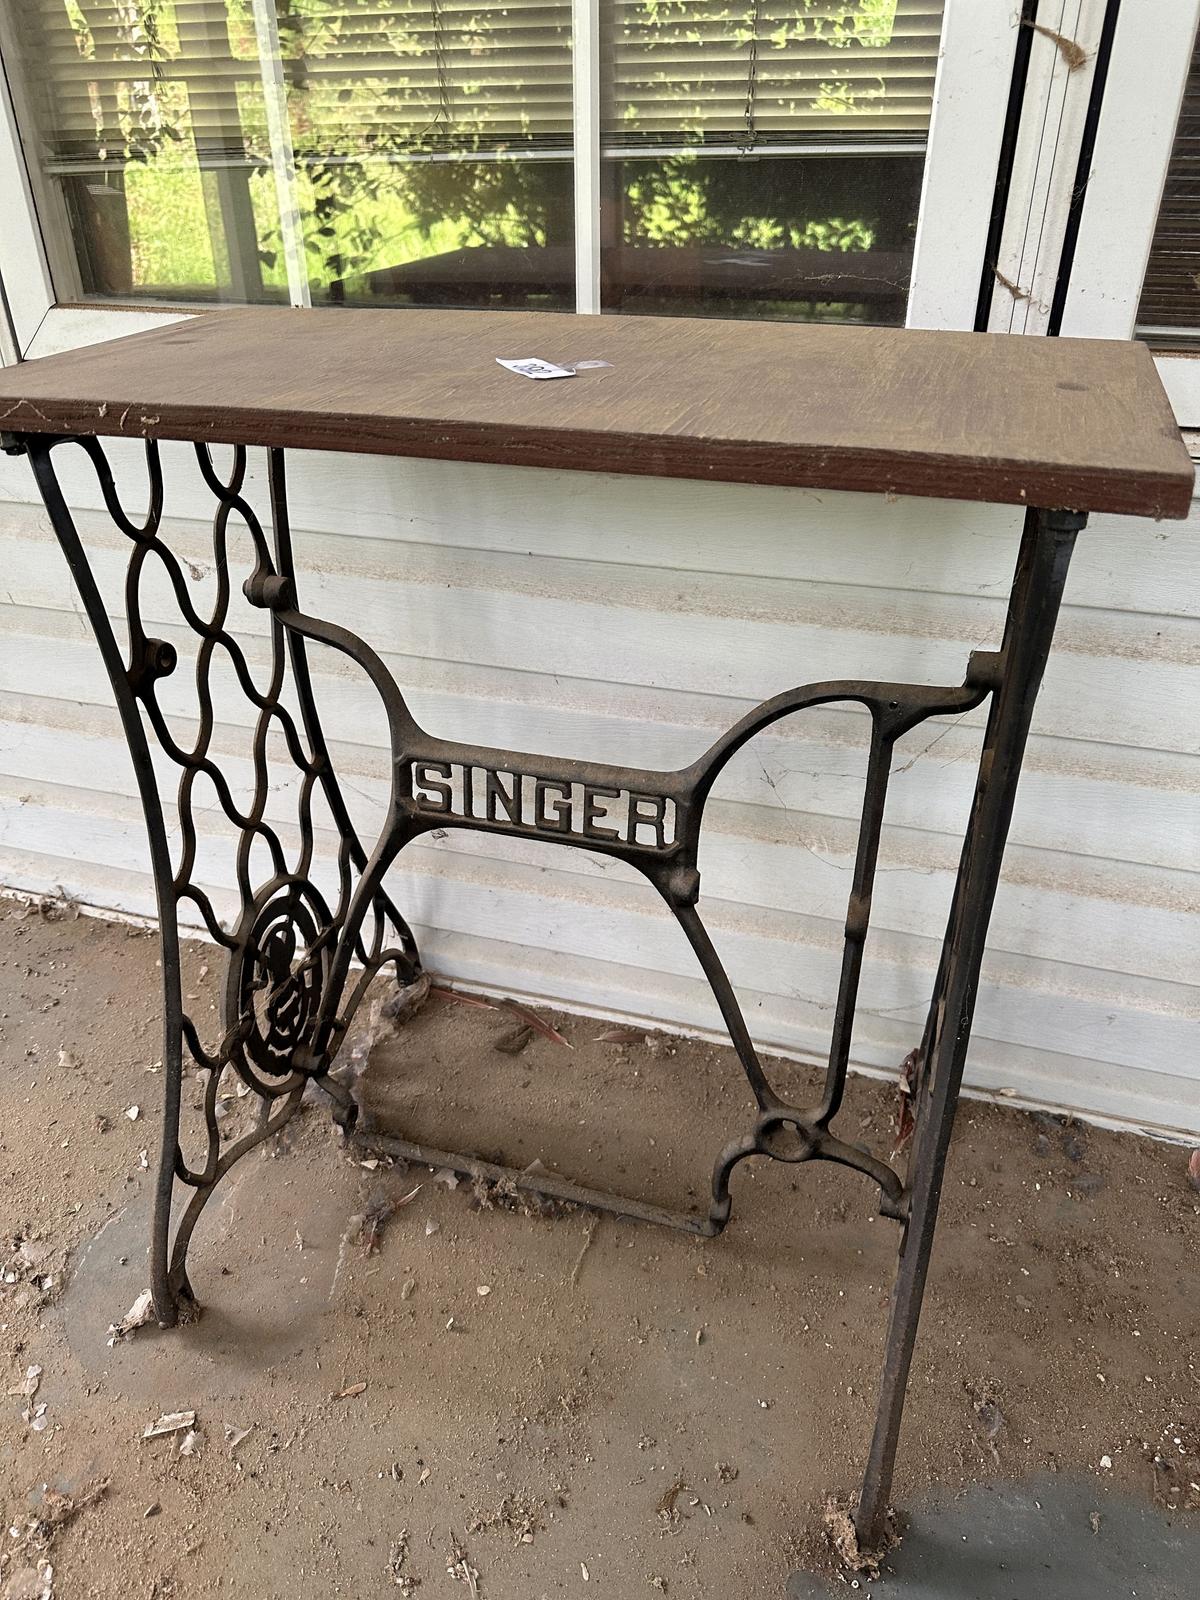 Vintage Singer Frame with Wooden Top (Local Pick Up Only)